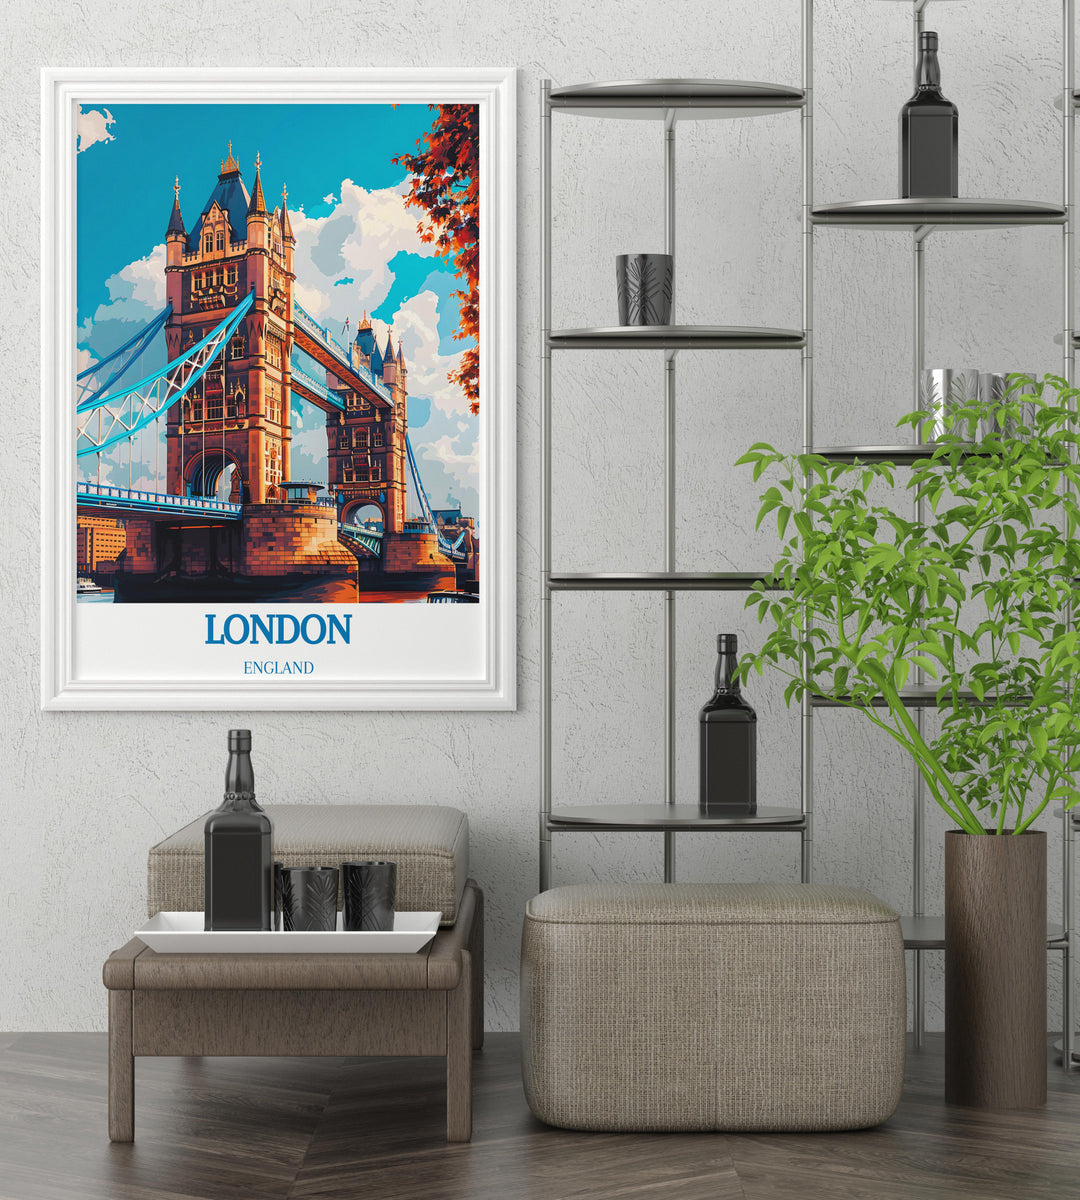 Custom print of Clissold Park, personalized to fit the aesthetic of any room or office space.